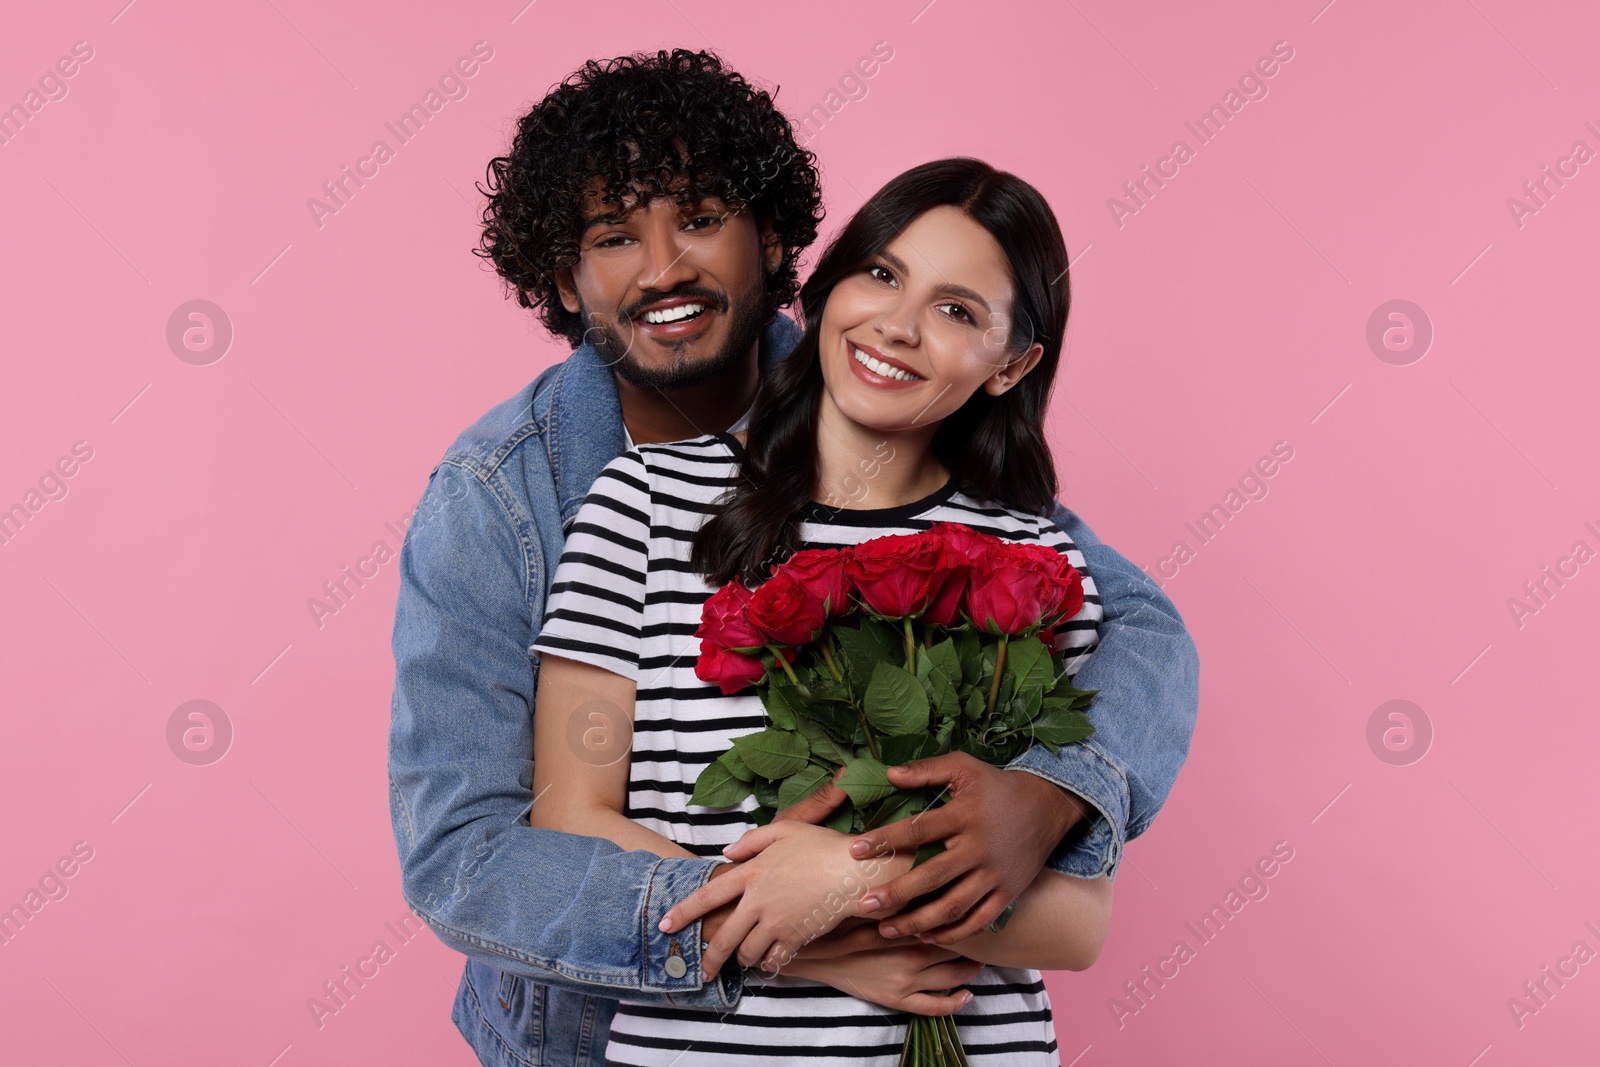 Photo of International dating. Happy couple with bouquet of roses on pink background